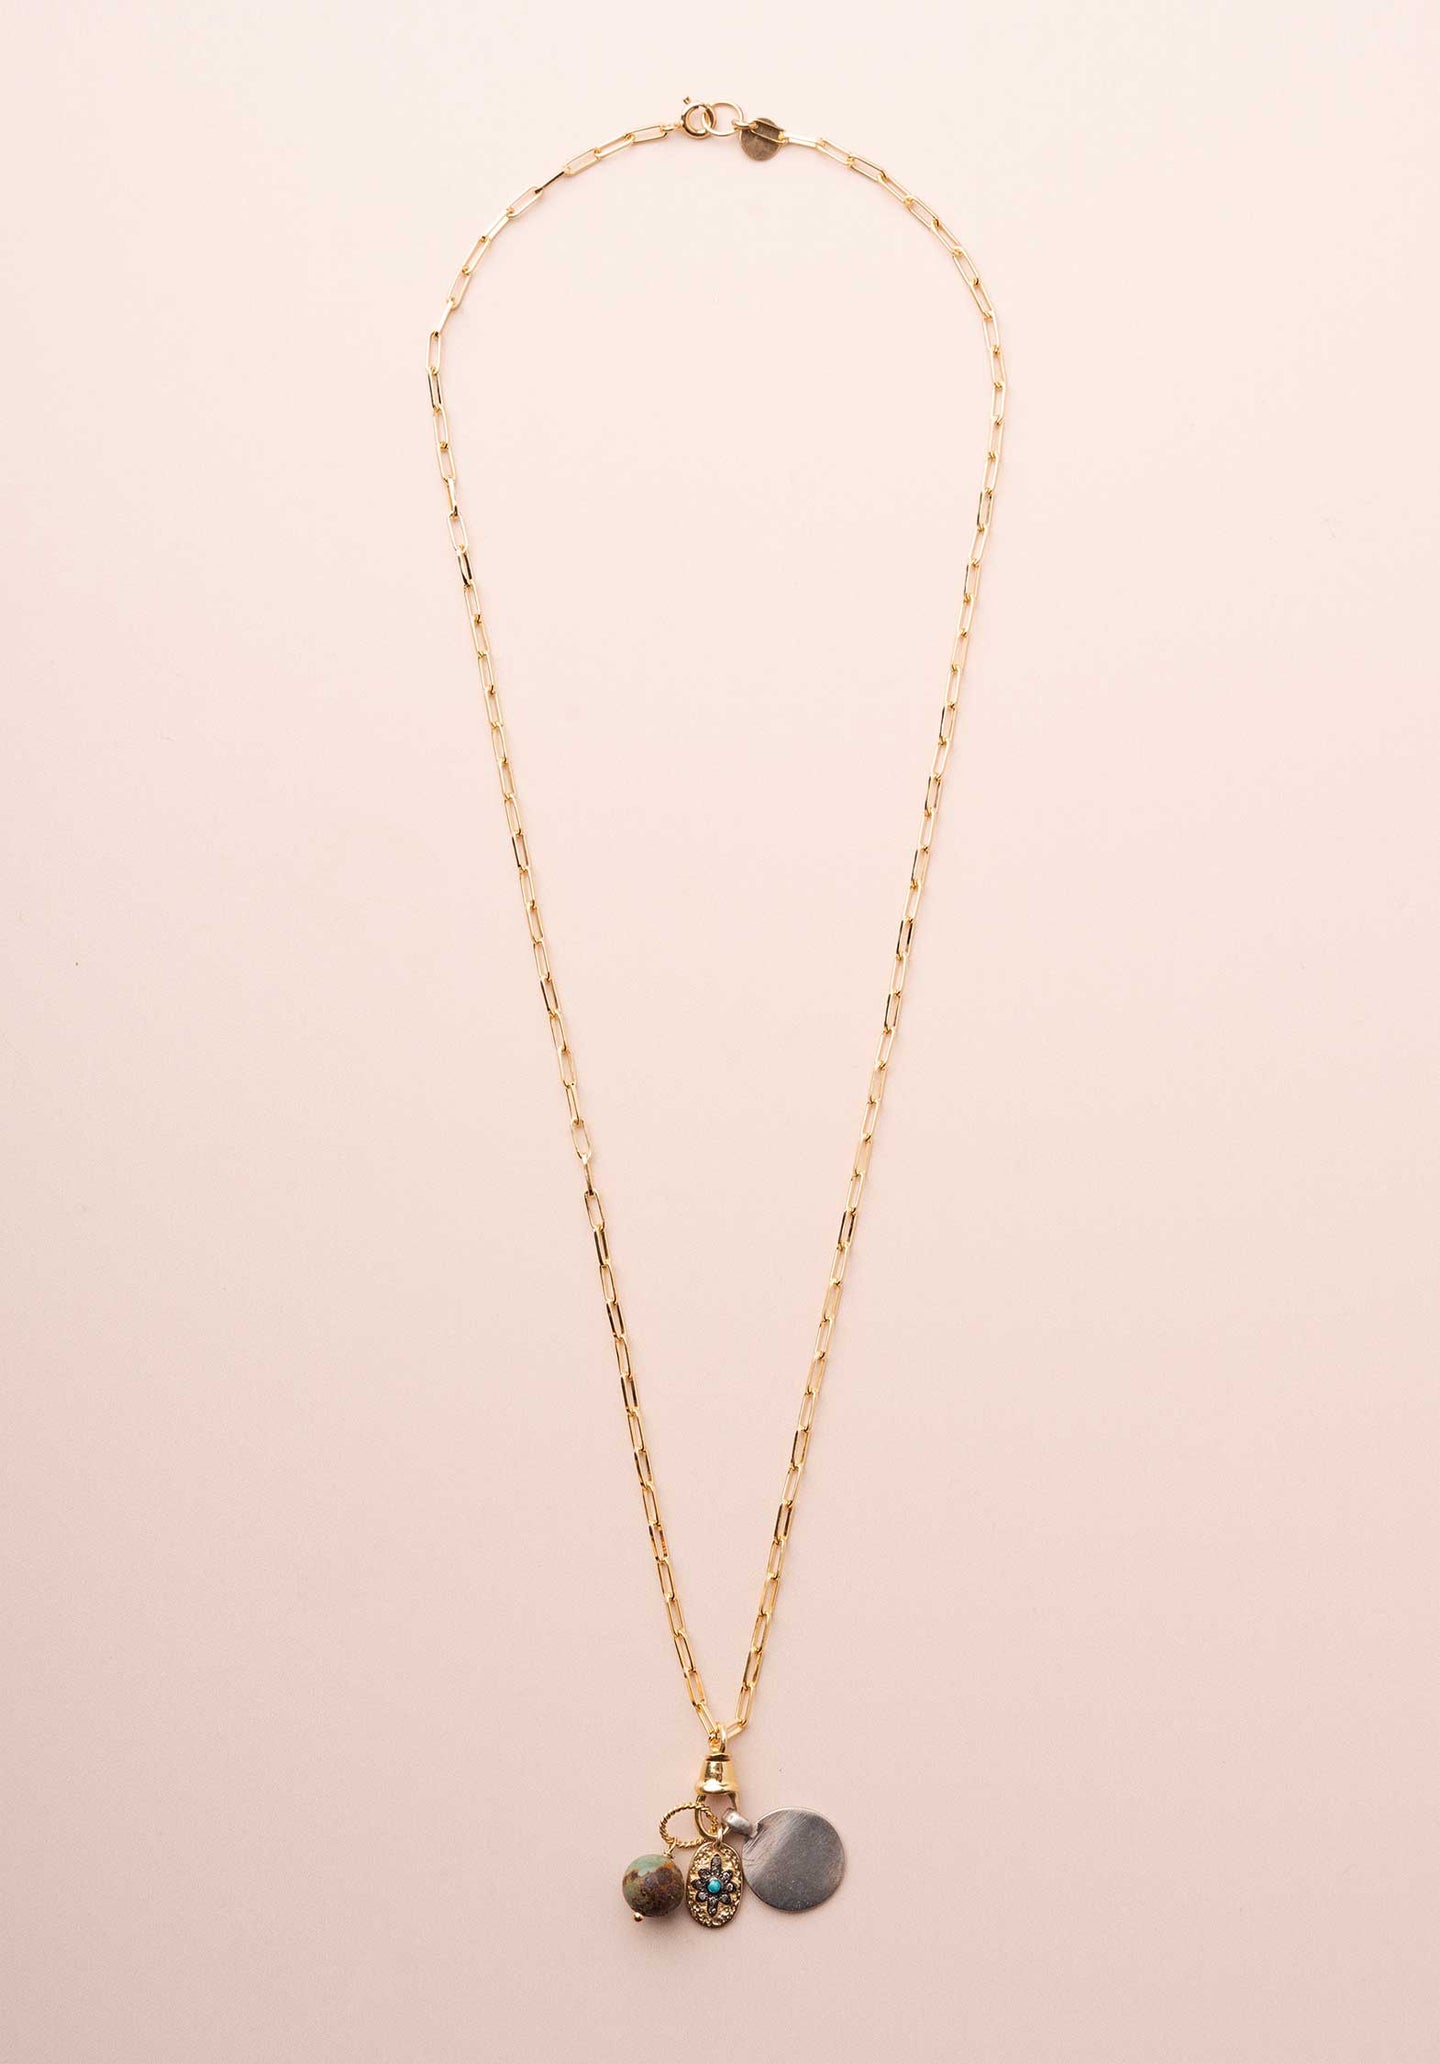 Necklace Holly T Argent-Dore-Or